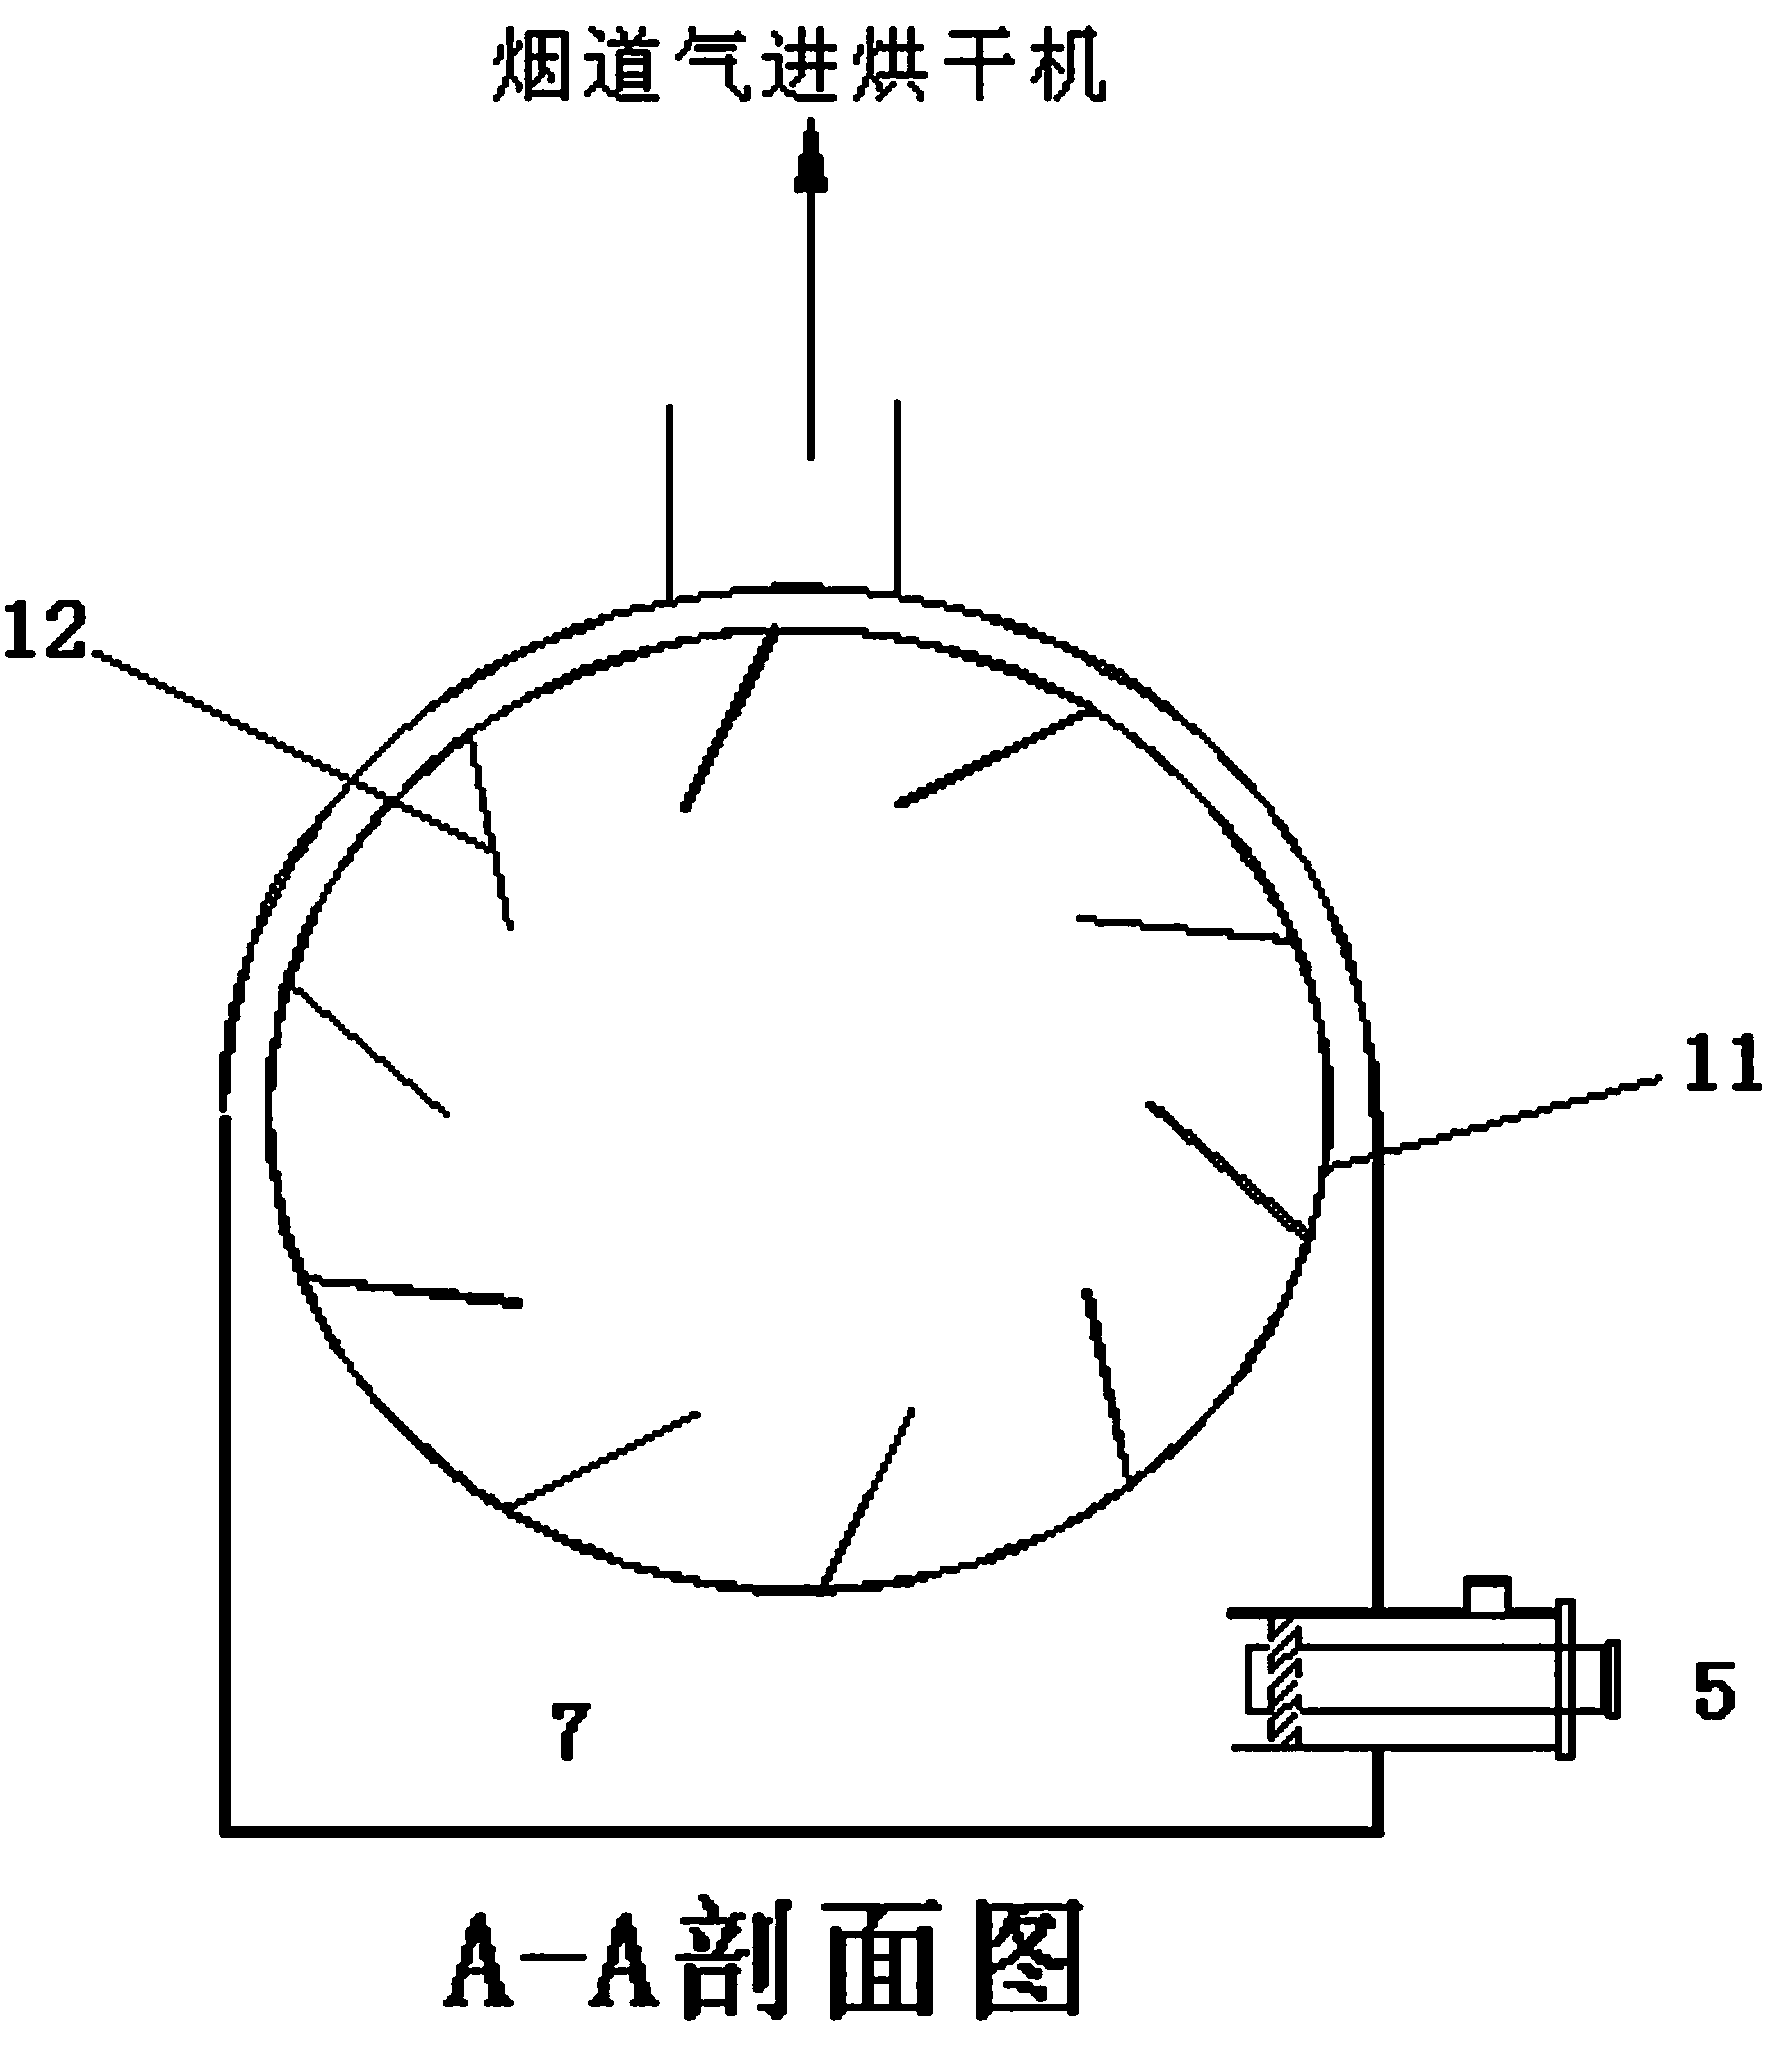 Process for producing fuel oil by thermal cracking of biomass